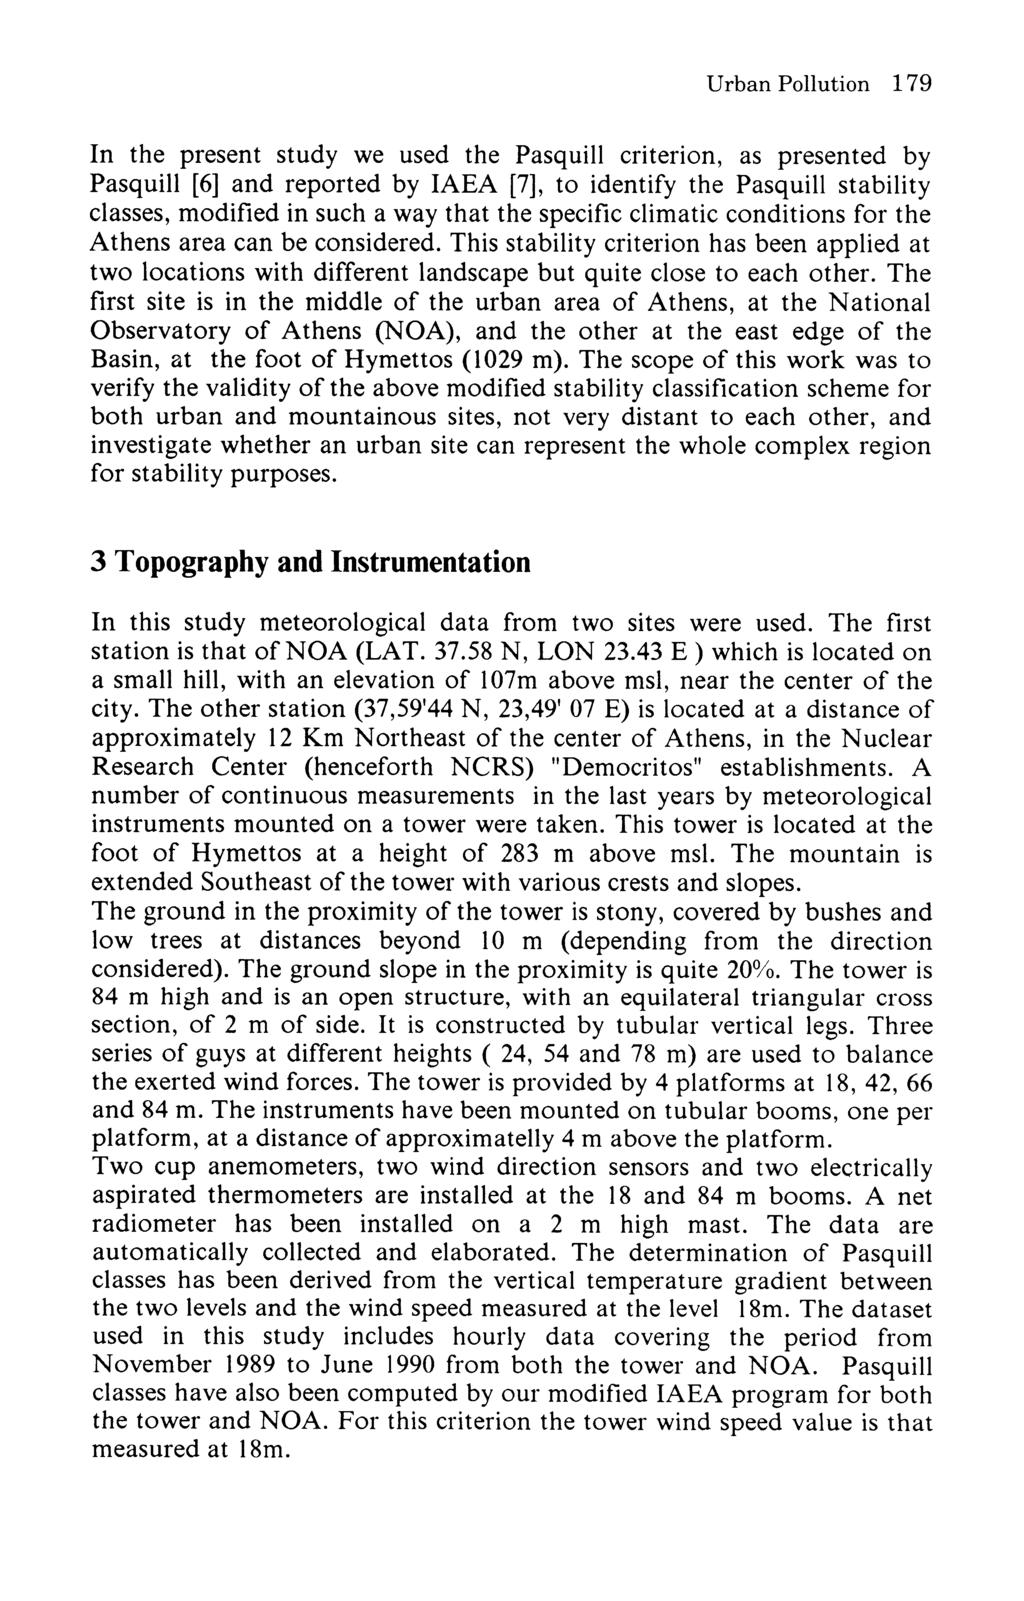 Urban Pollution 179 In the present study we used the Pasquill criterion, as presented by Pasquill [6] and reported by IAEA [7], to identify the Pasquill stability classes, modified in such a way that